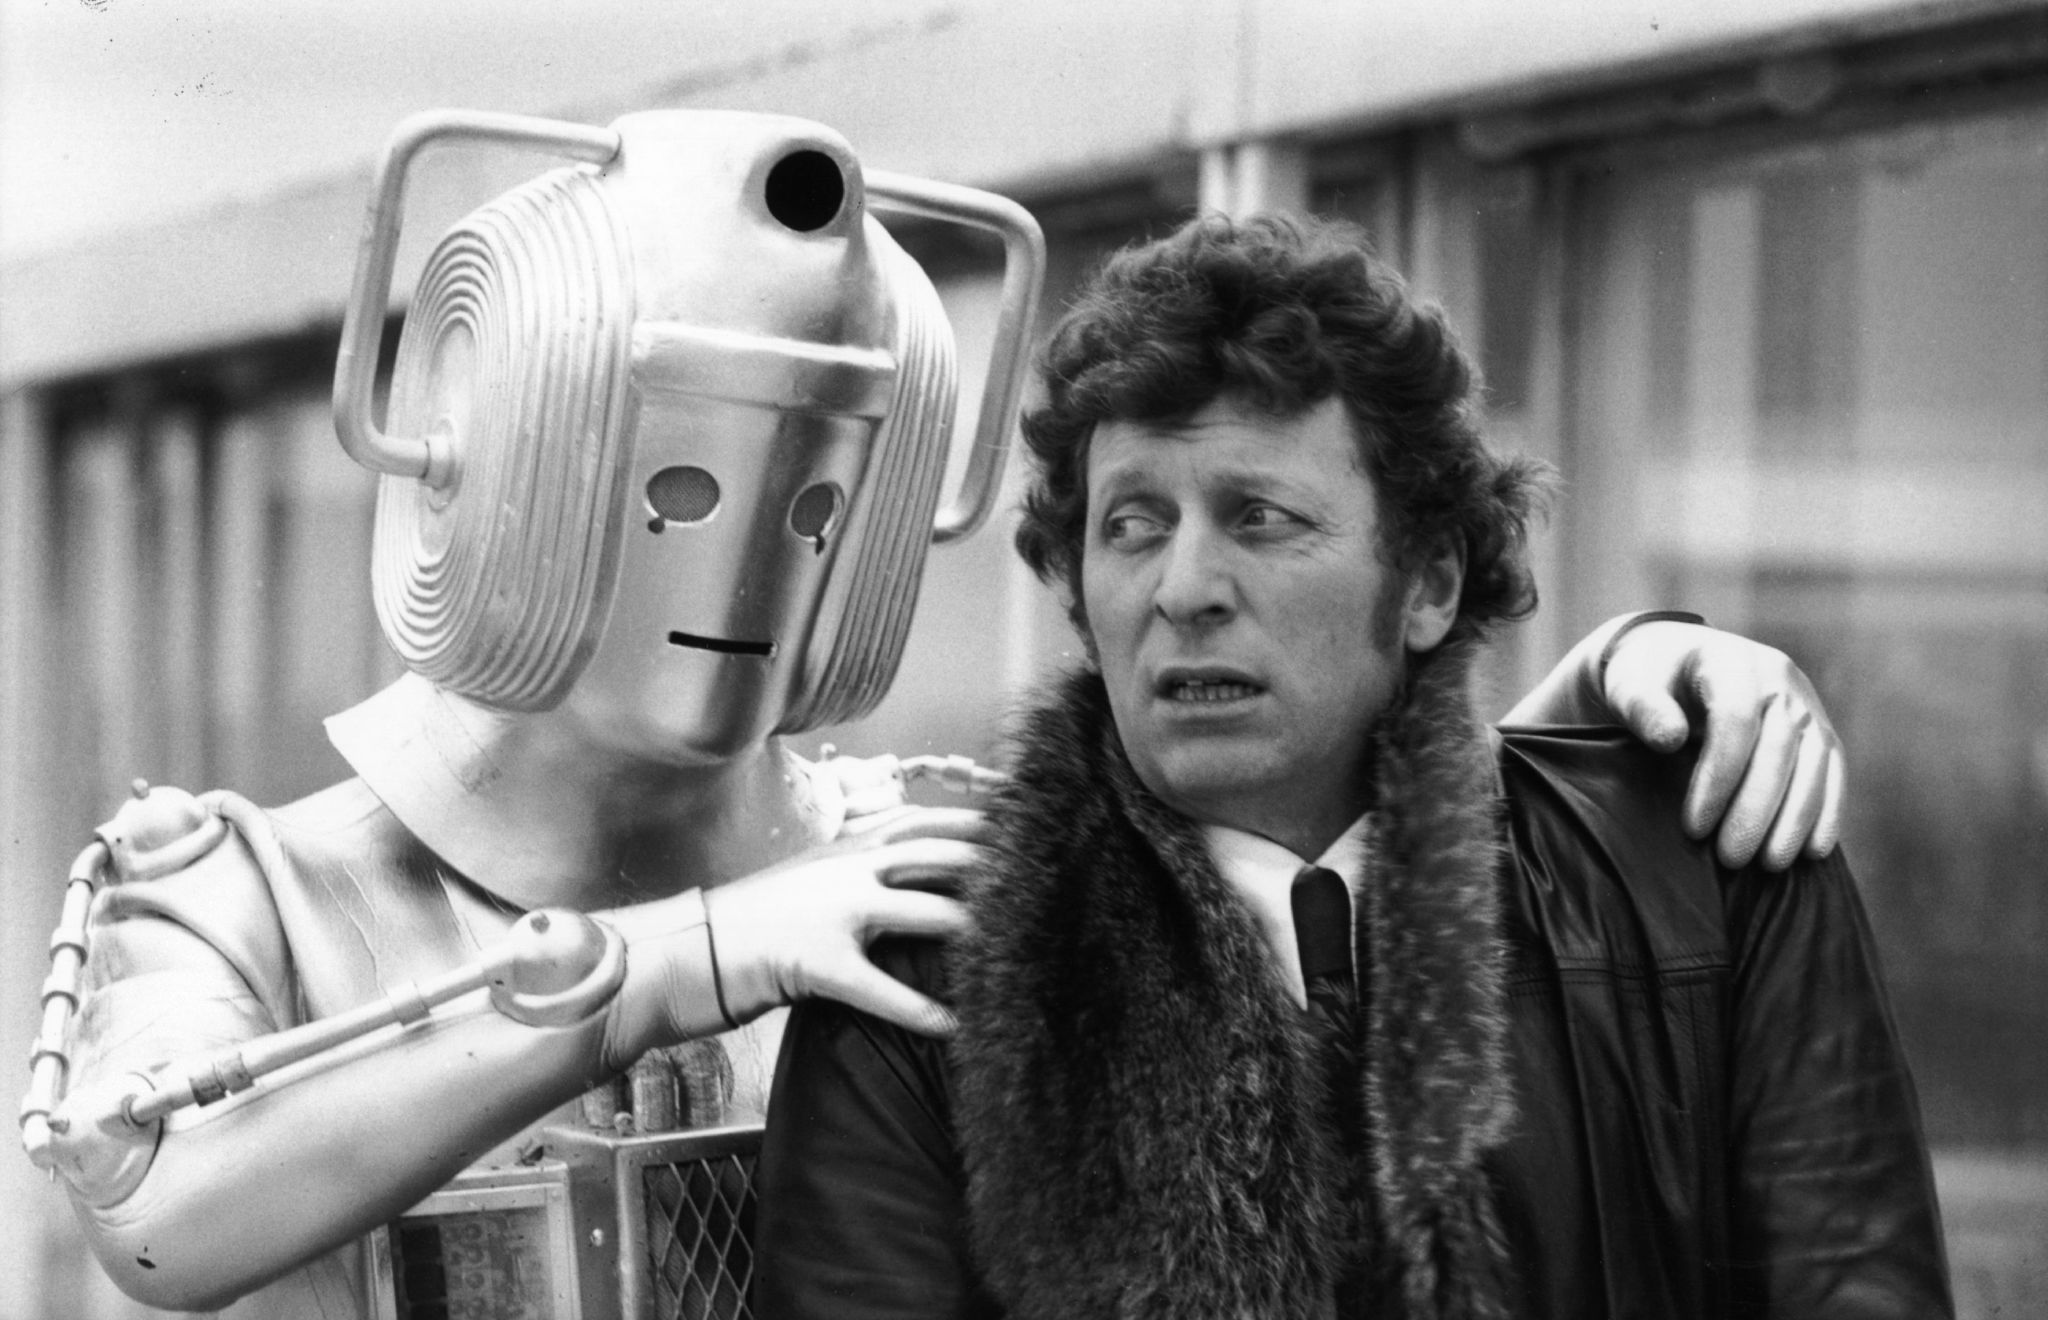 Dr Who (Tom Baker) meets one of the monsters from his new series.